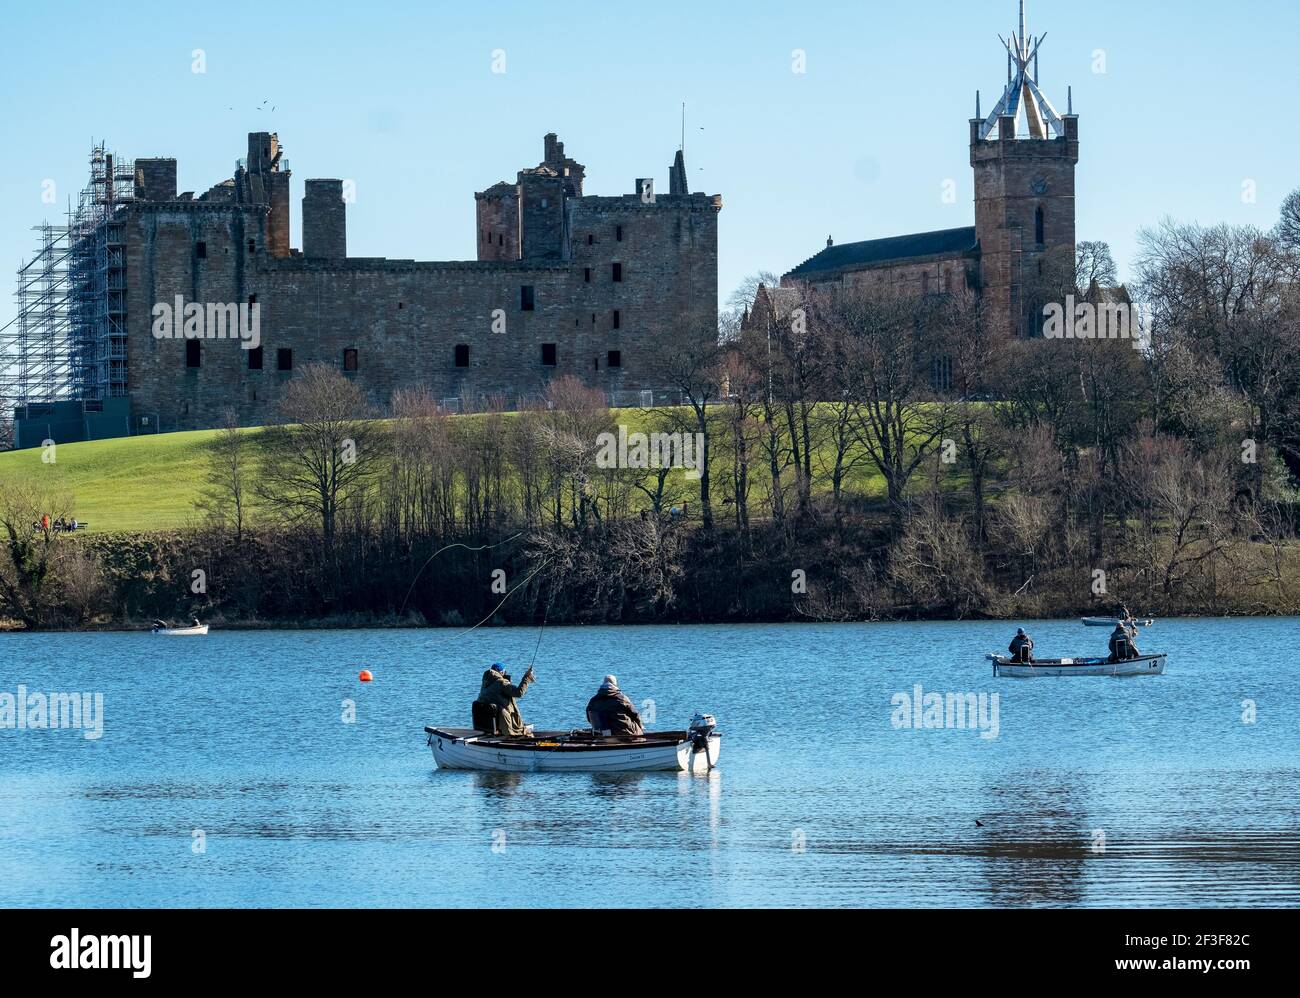 Men fly fishing from boats on Linlithgow Loch with Linlithgow Palace behind. Stock Photo